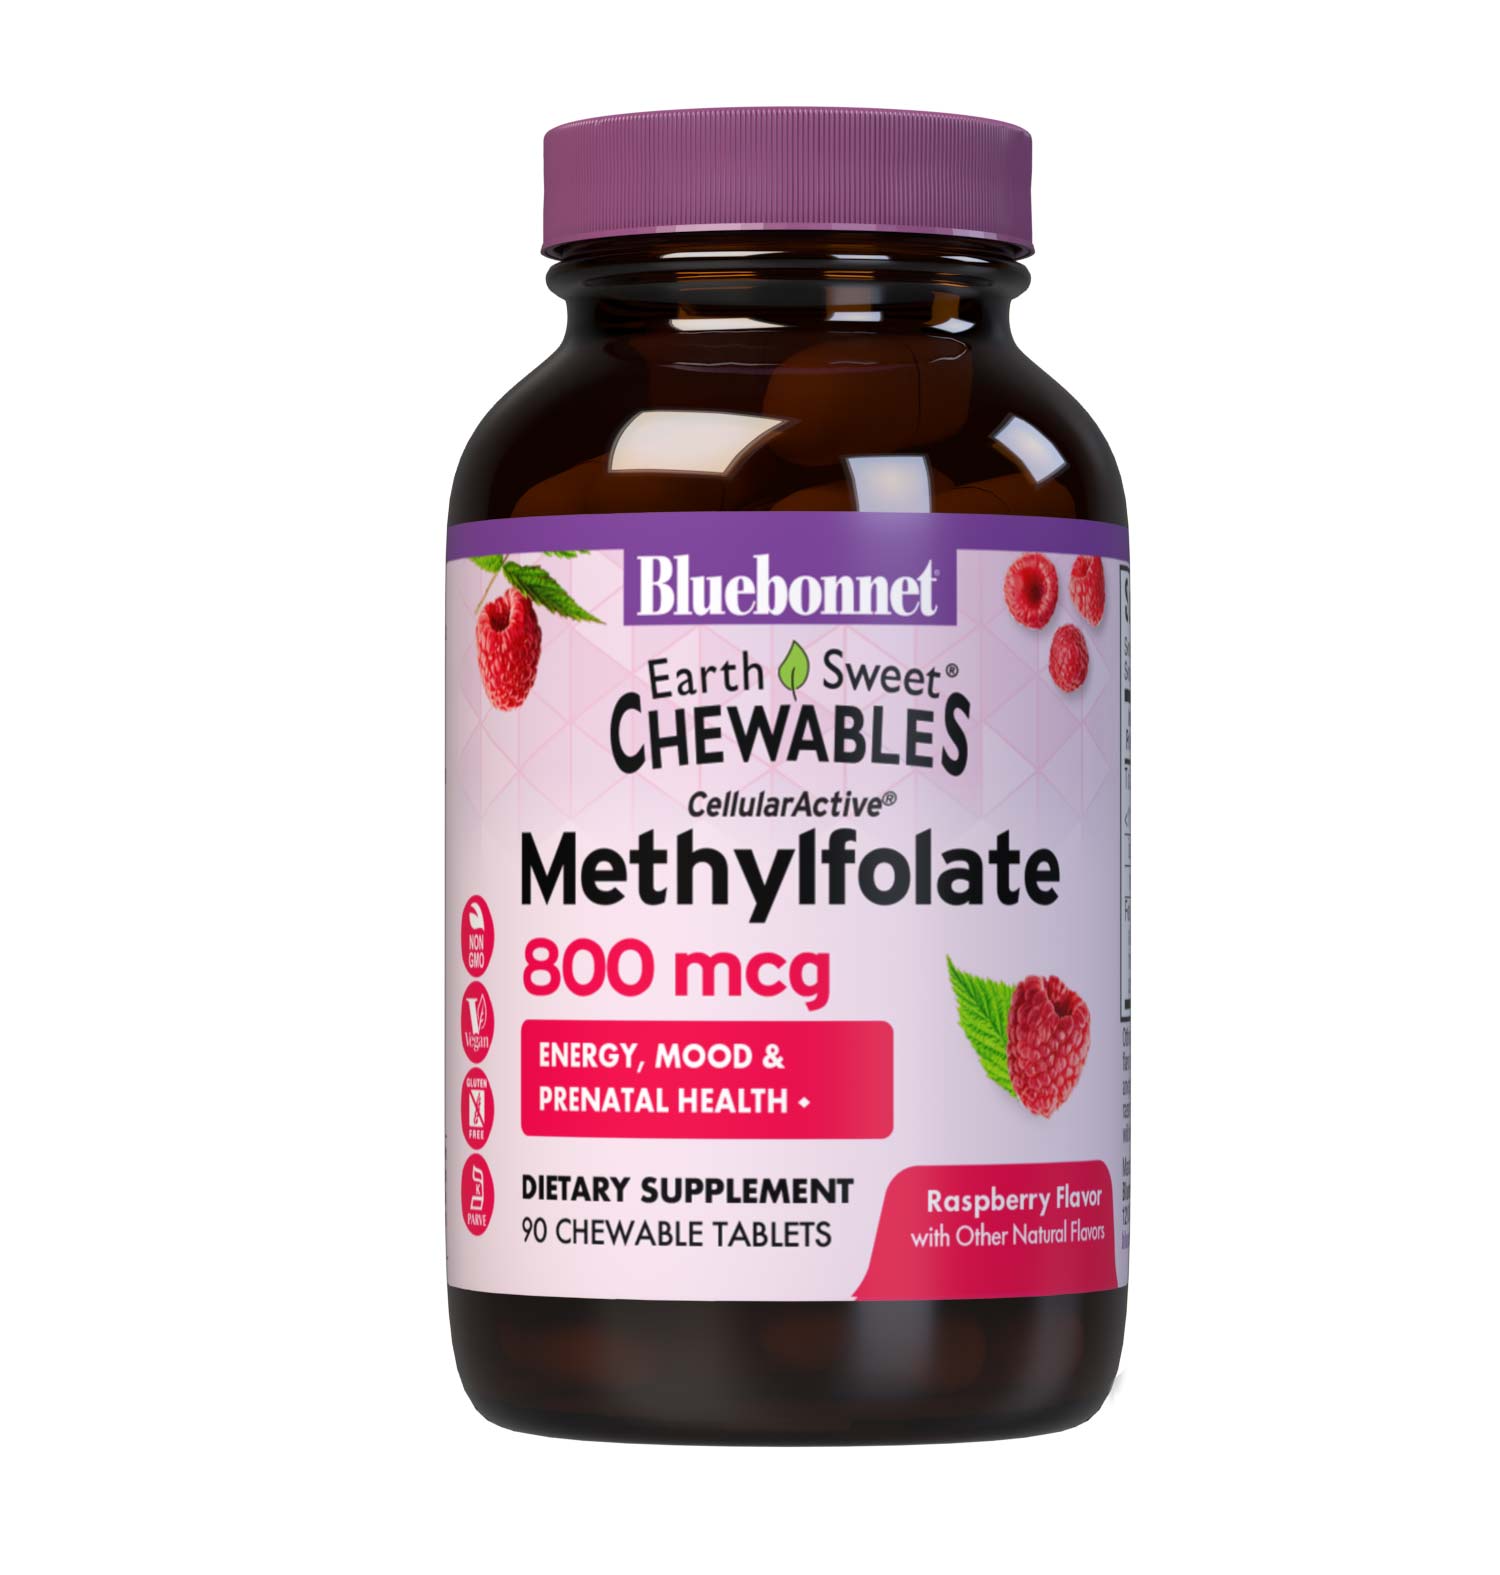 Bluebonnet’s EarthSweet Chewables CellularActive Methylfolate 800 mcg Tablets are formulated with QuatreFolic a fourth generation folate that supports healthy neurological development, and that has superior stability, solubility, safety and bioactivity when compared to other forms. This product sweetened with EarthSweet a proprietary sweetening mix of fruit powders and sugar cane crystals. #size_90 count